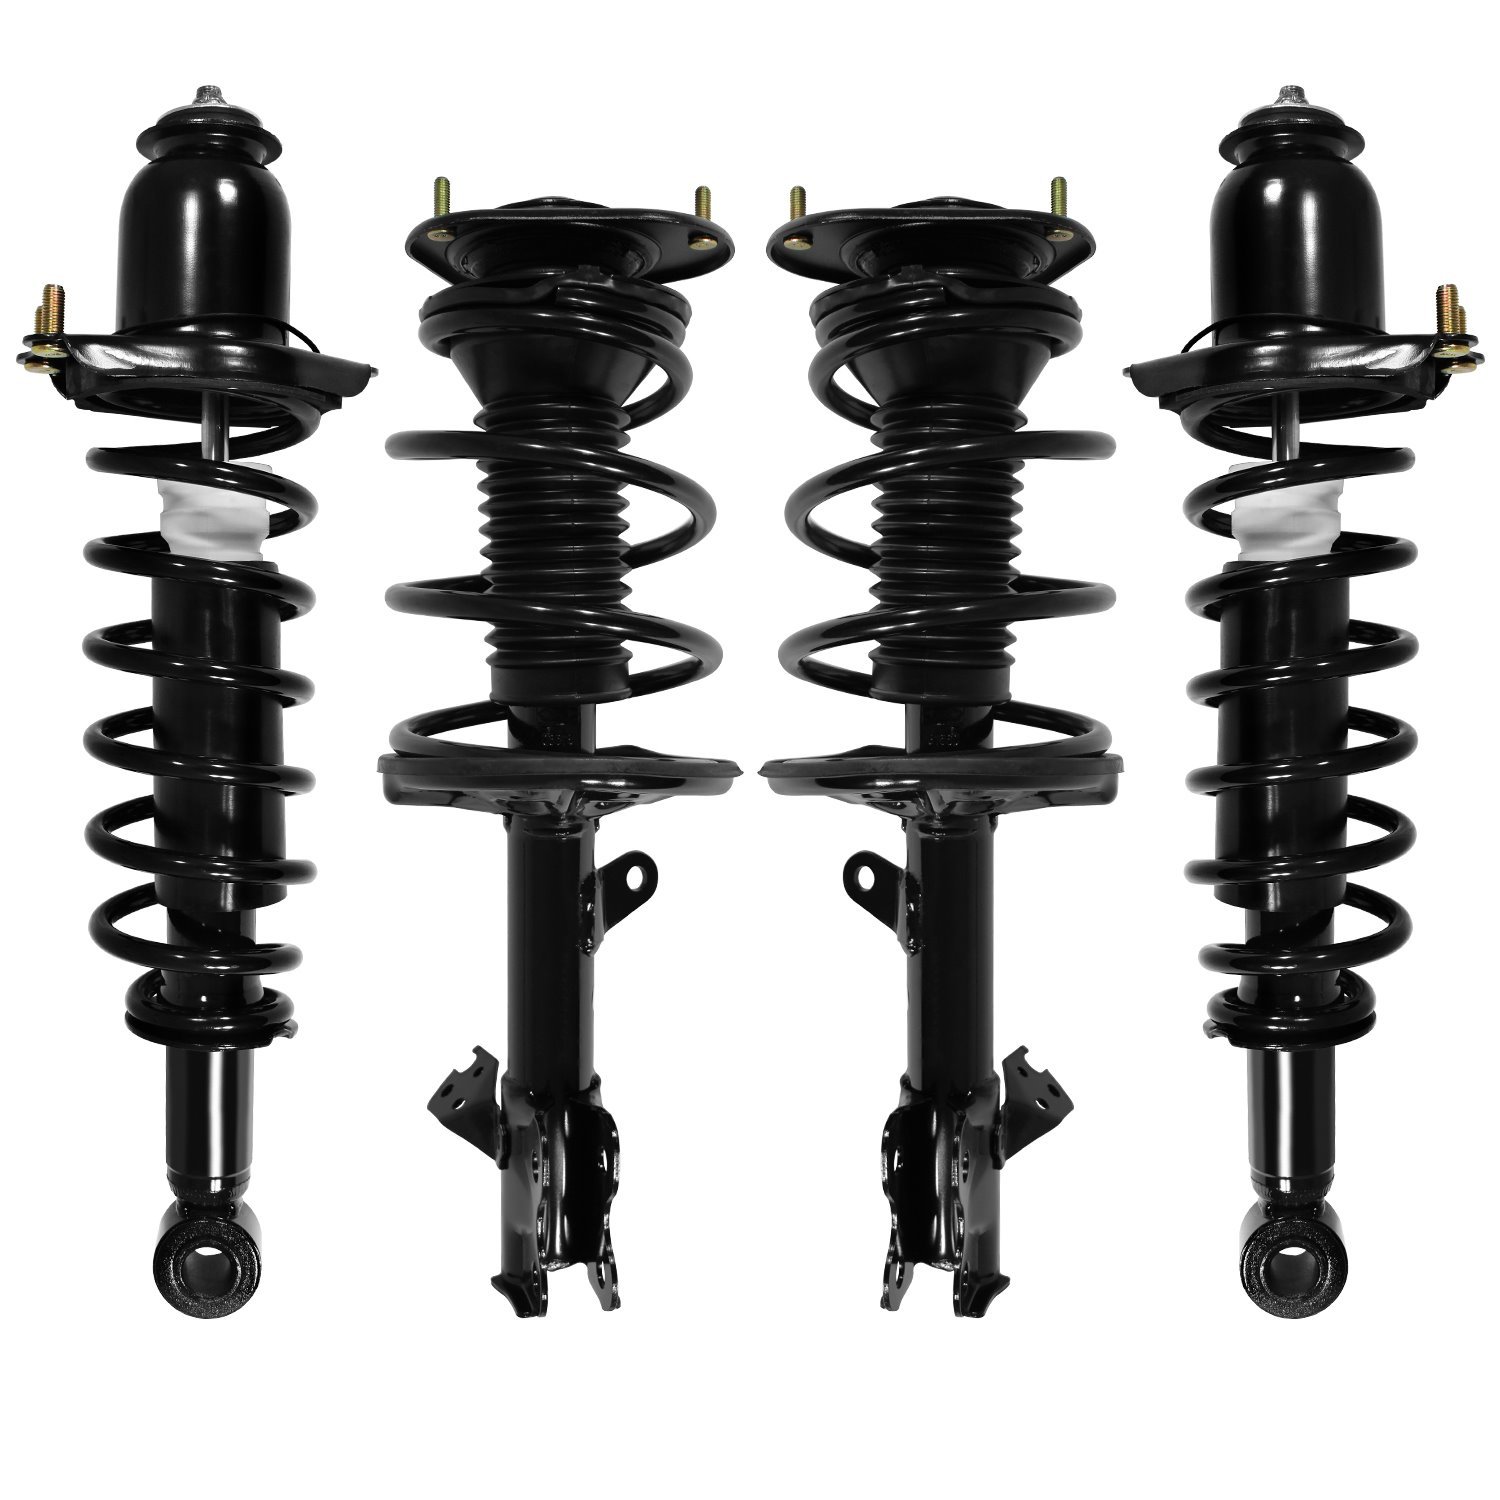 4-11963-15320-001 Front & Rear Suspension Strut & Coil Spring Assembly Kit Fits Select Toyota Prius